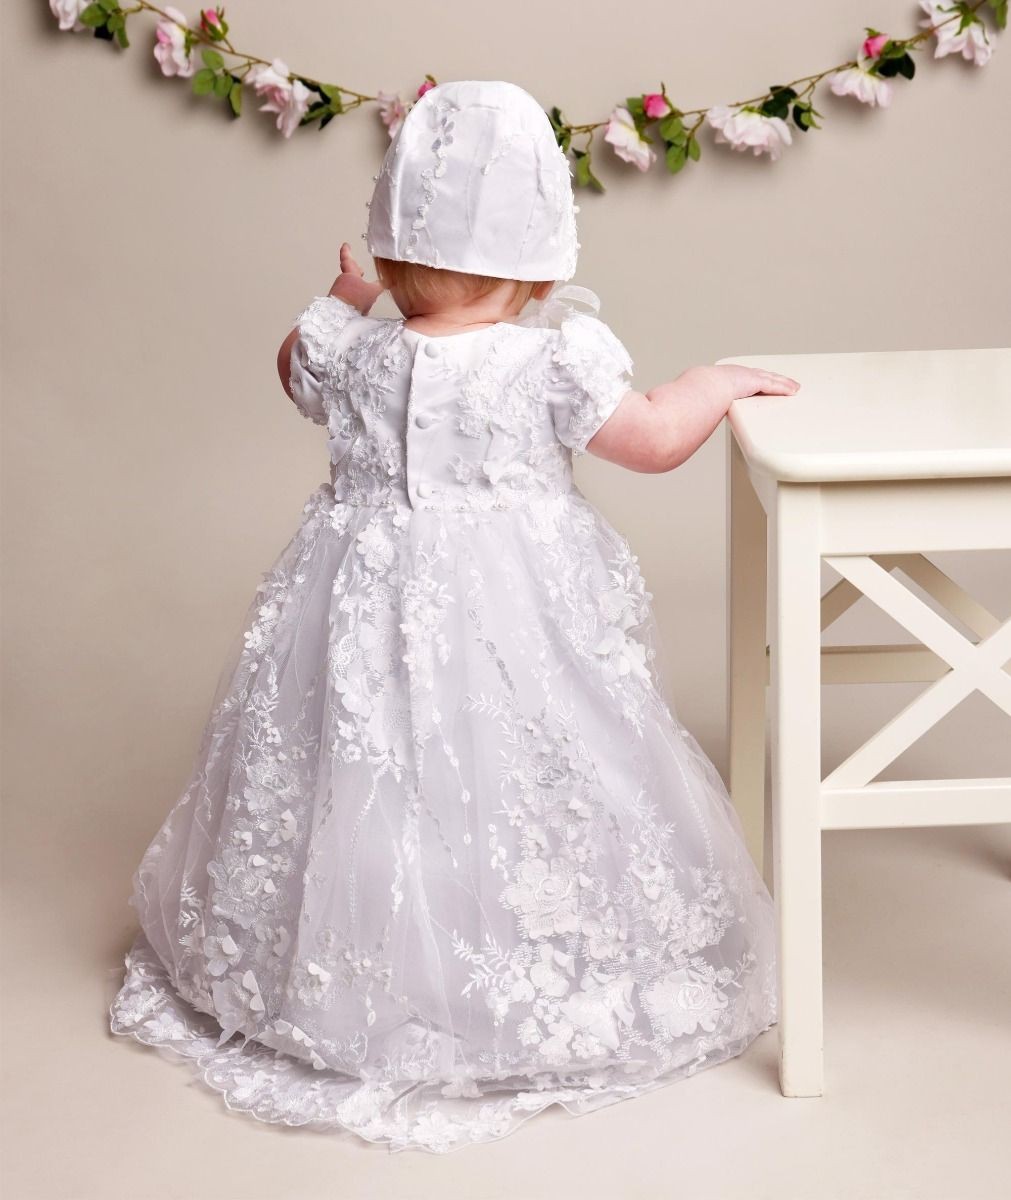 Baby Girls Lace Heirloom Christening Gown & Bonnet - RACHEAL - White